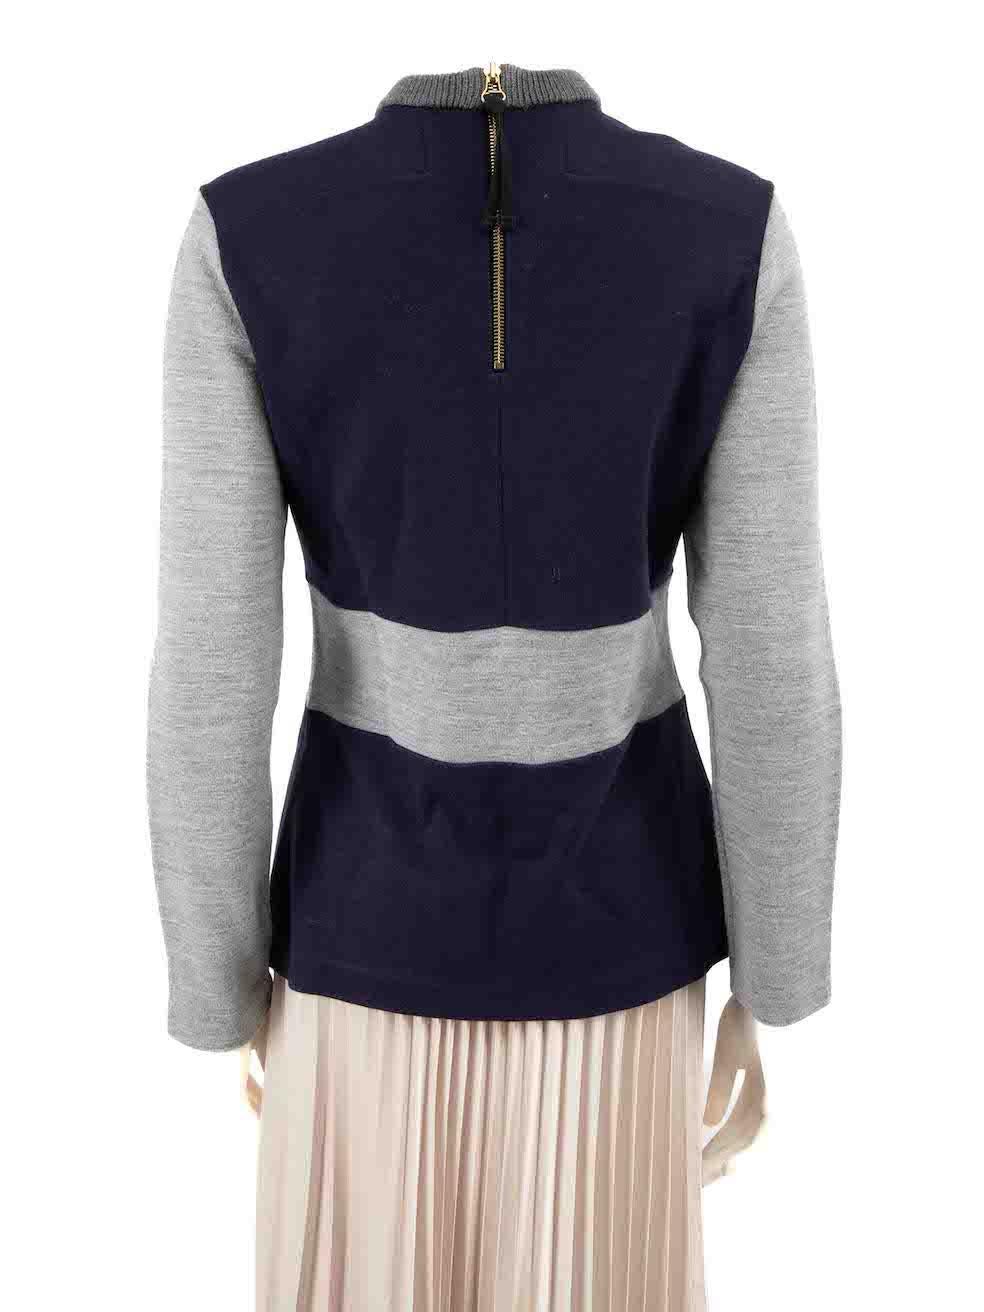 Marni Navy Contrast Panel Sweatshirt Size L In New Condition For Sale In London, GB